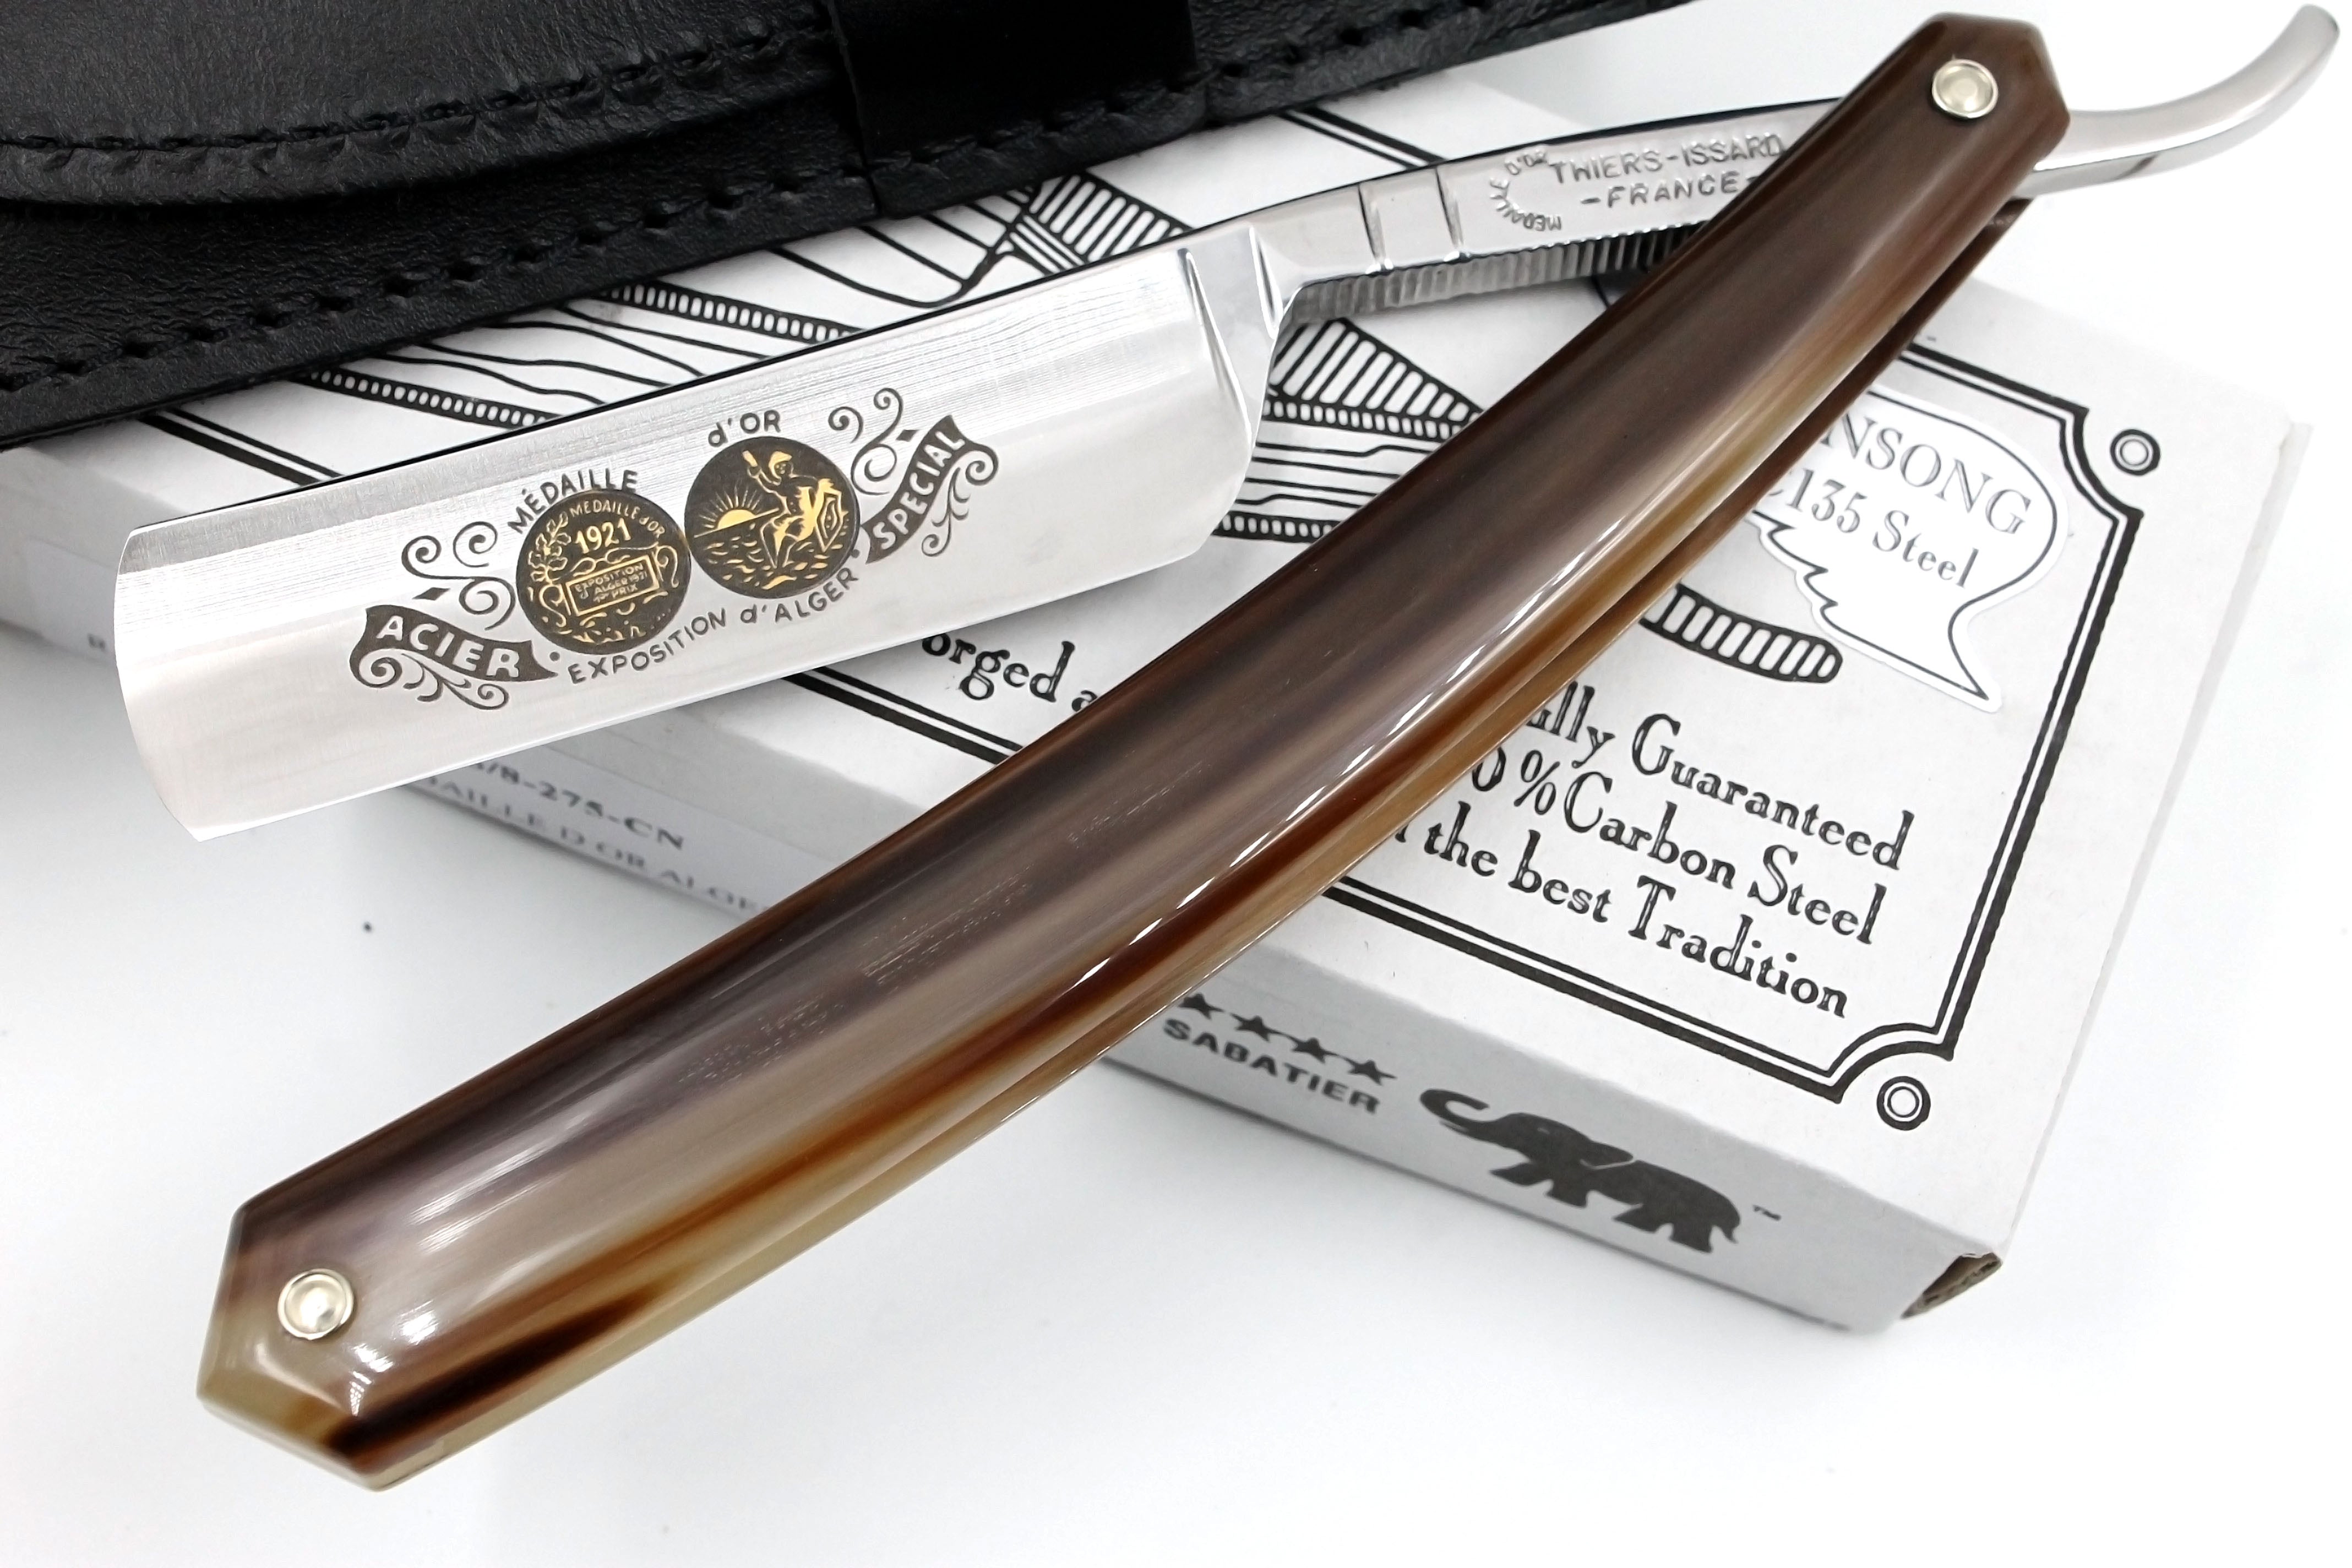 Thiers Issard 6/8 "Medaille d'or Alger" Etch - Blonde Horn Scales - Full Hollow Straight Razor